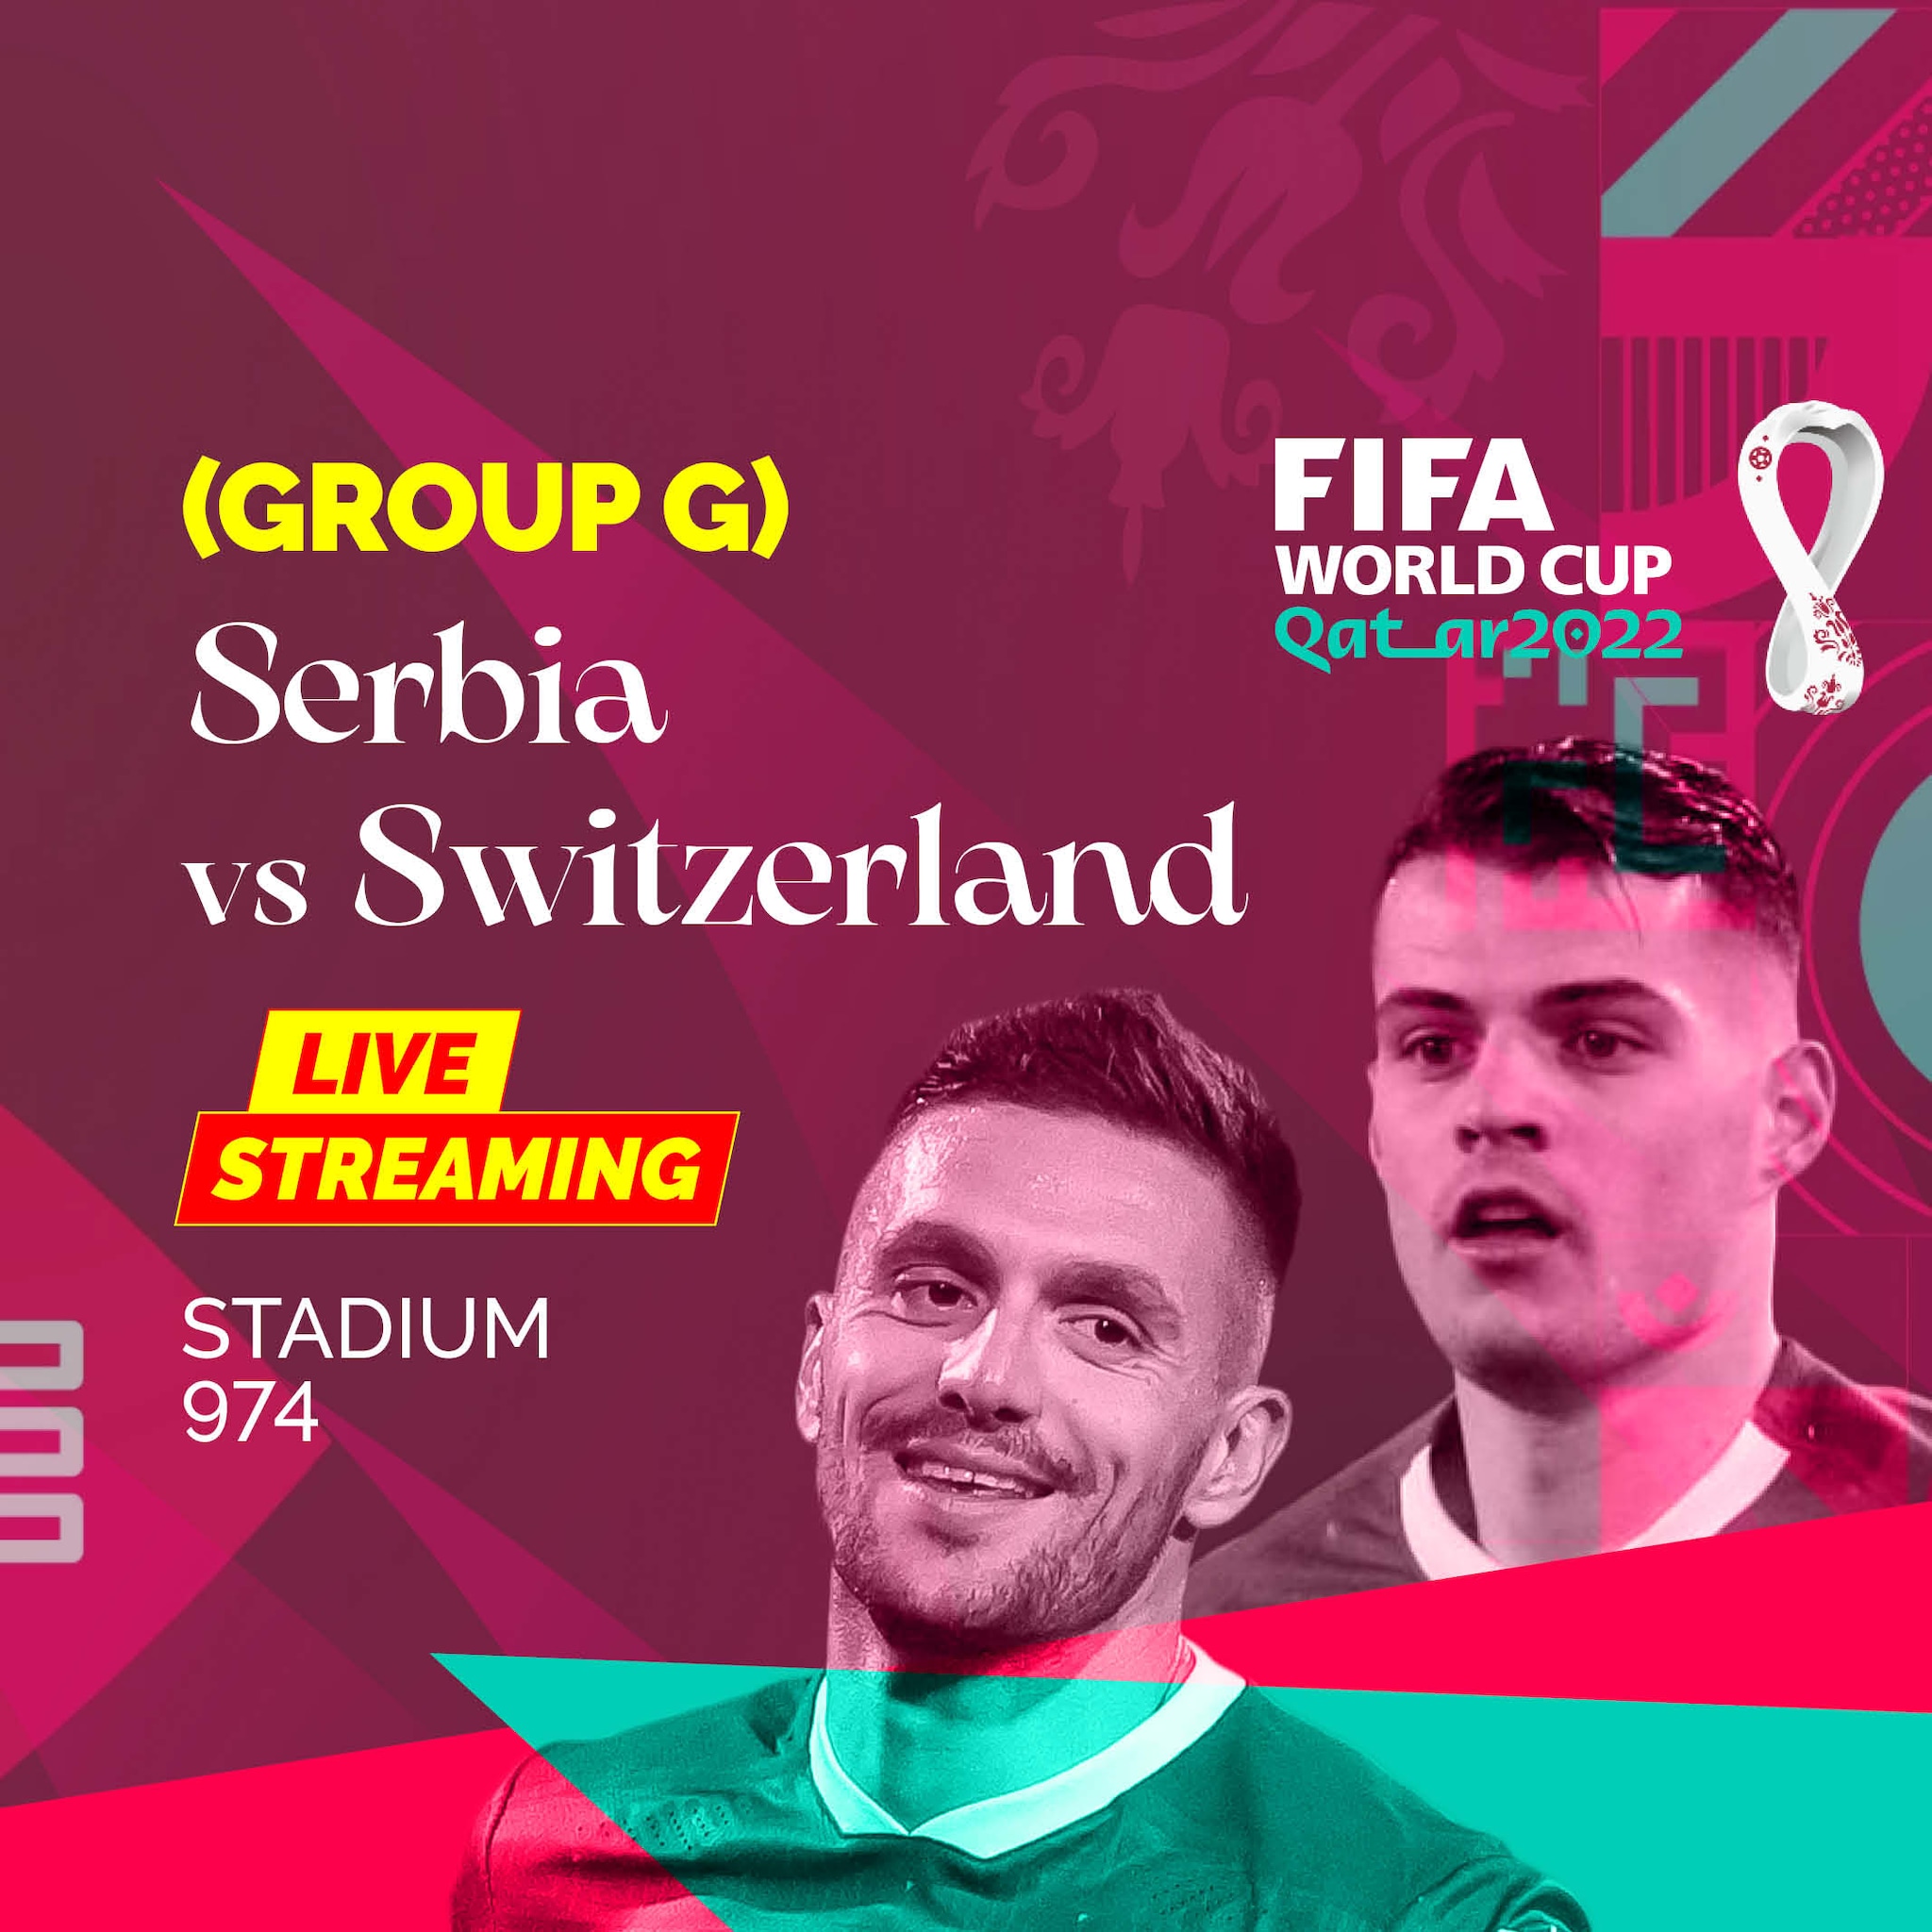 Highlights FIFA World Cup 2022- Group G, Serbia vs Switzerland